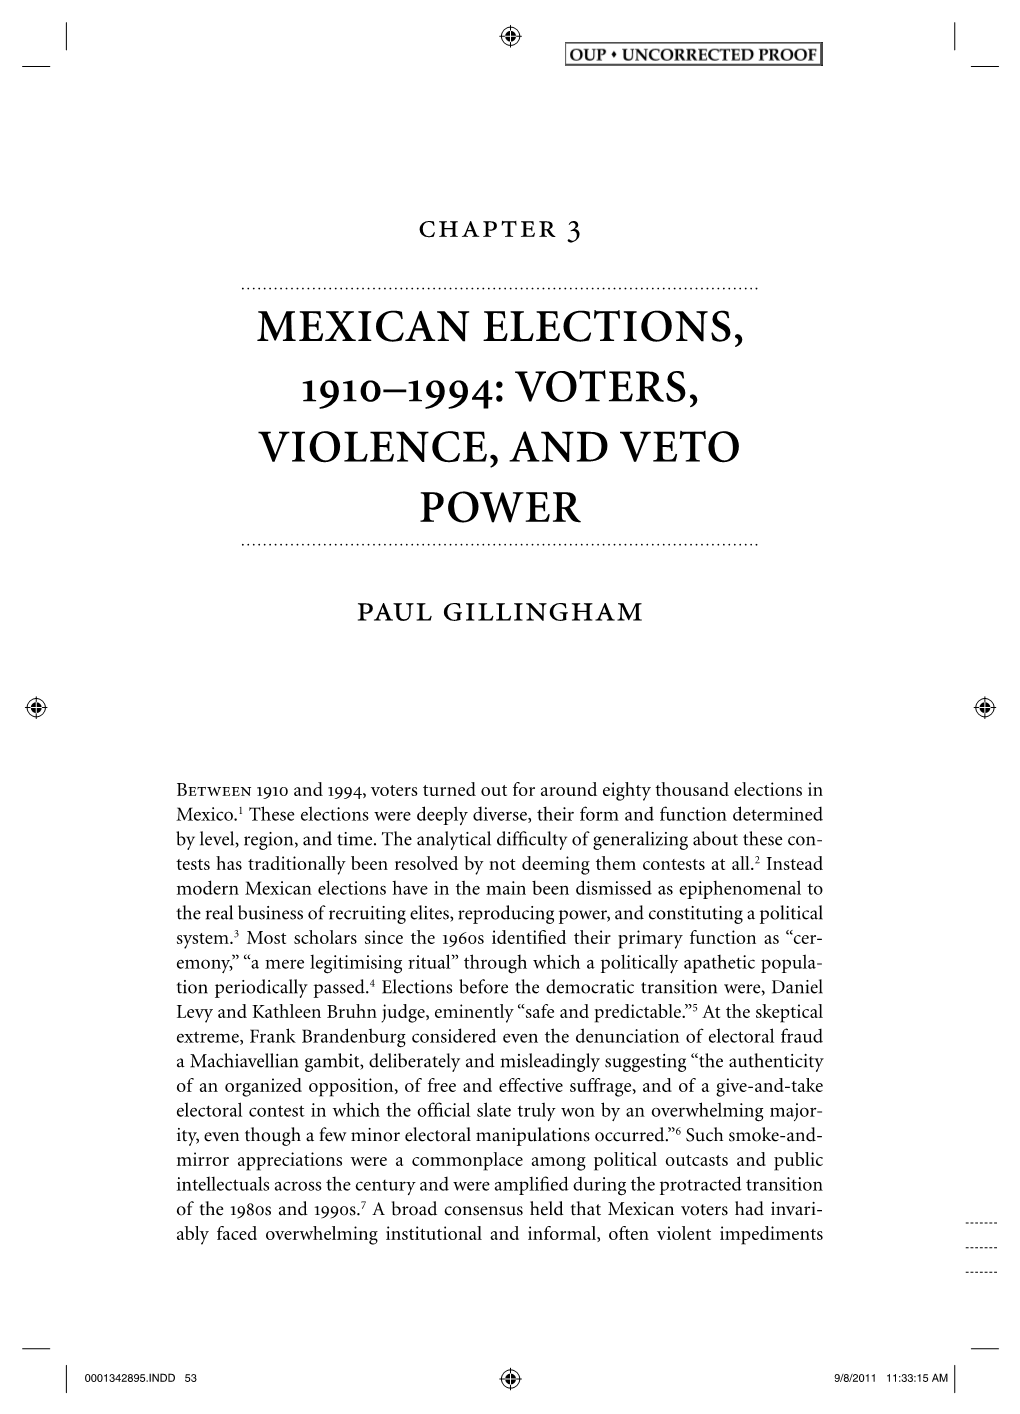 Mexican Elections, 1910–1994: Voters, Violence, and Veto Power